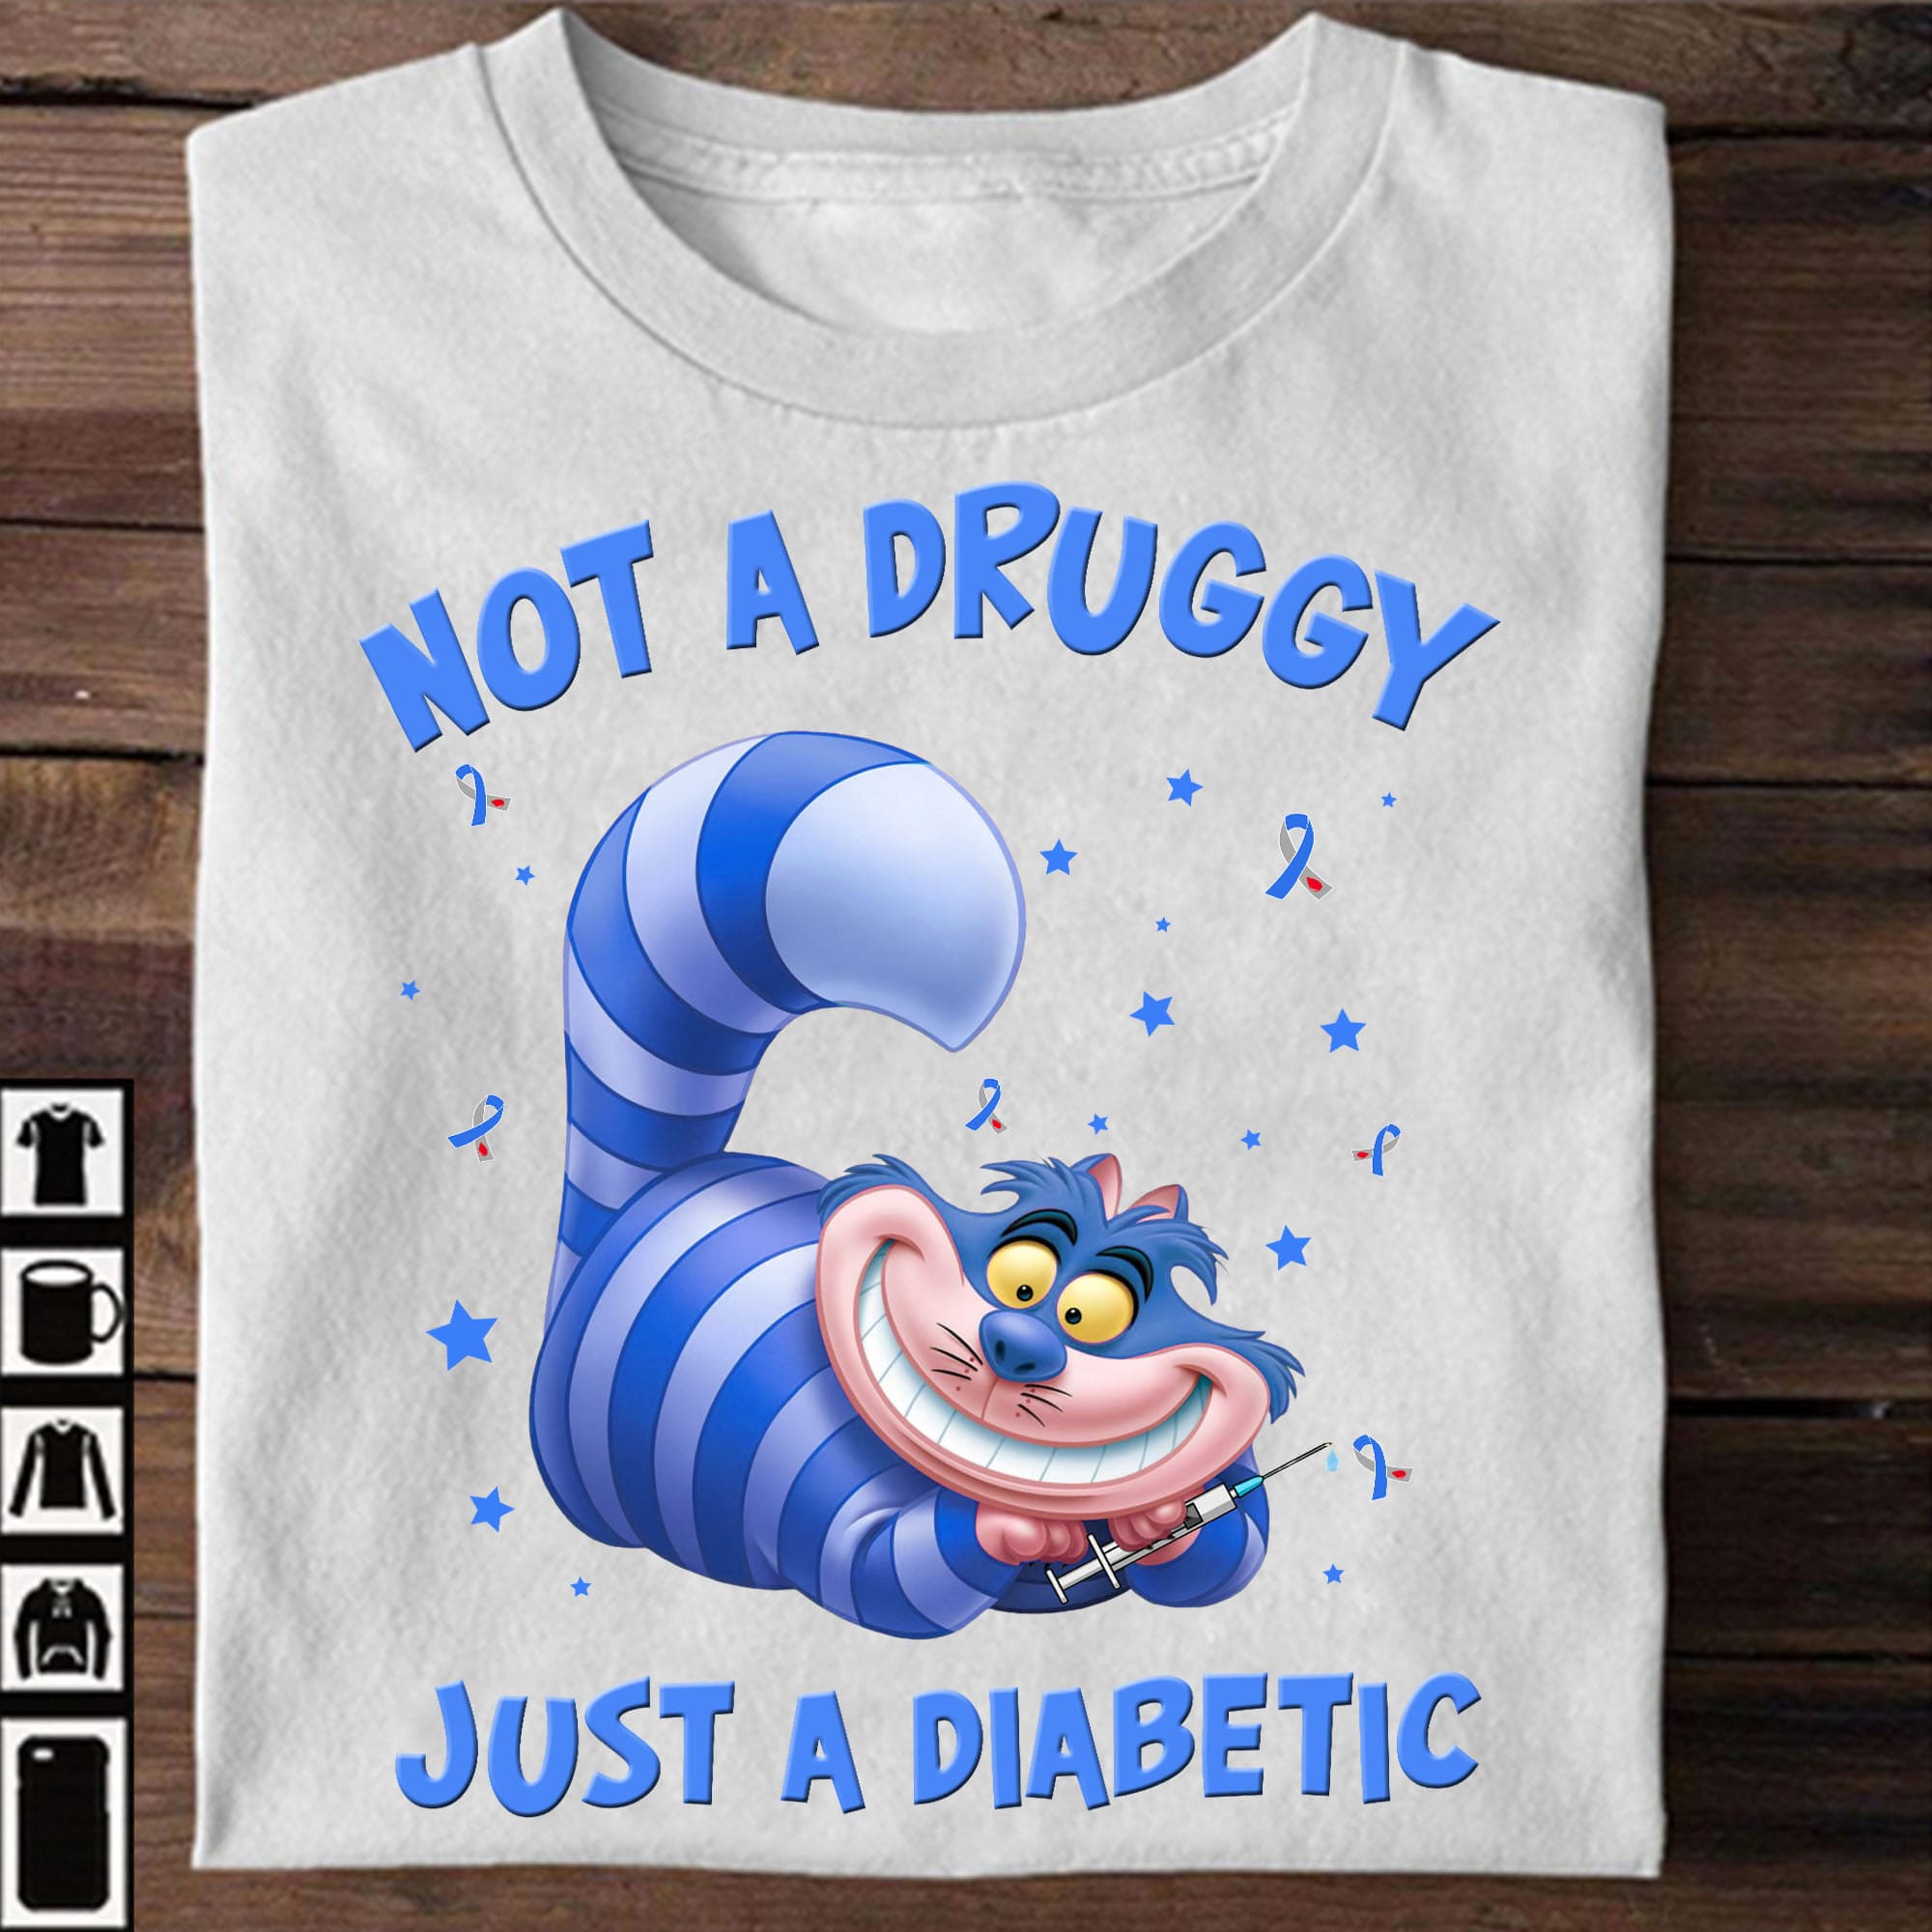 Not a druggy, just a diabetic - Diabetes awareness, Chesire cat T-shirt